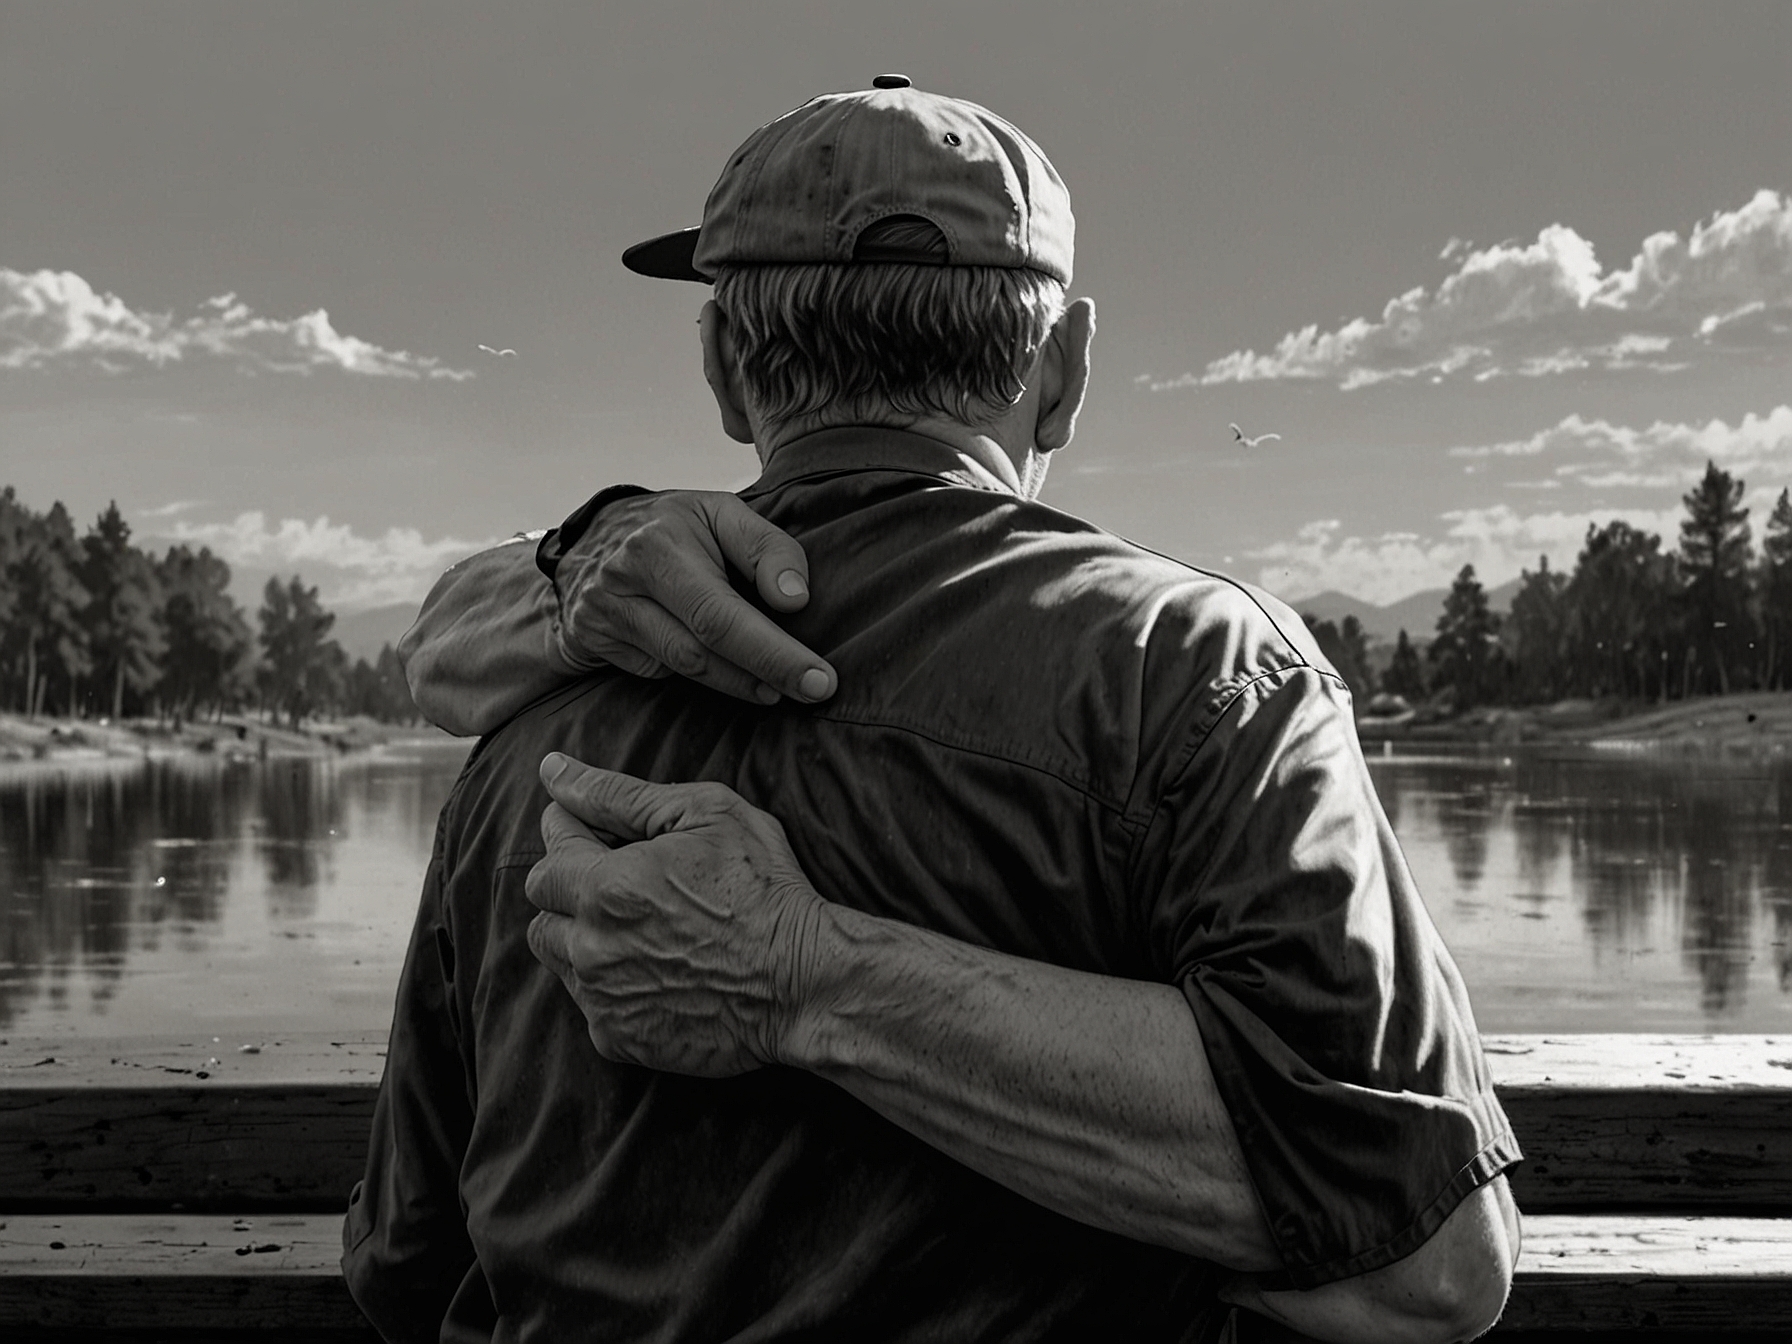 A touching father-son moment is illustrated, with Elliot Minchella and his father sharing a proud, emotional embrace, highlighting the deep bond and support that has fueled his career.